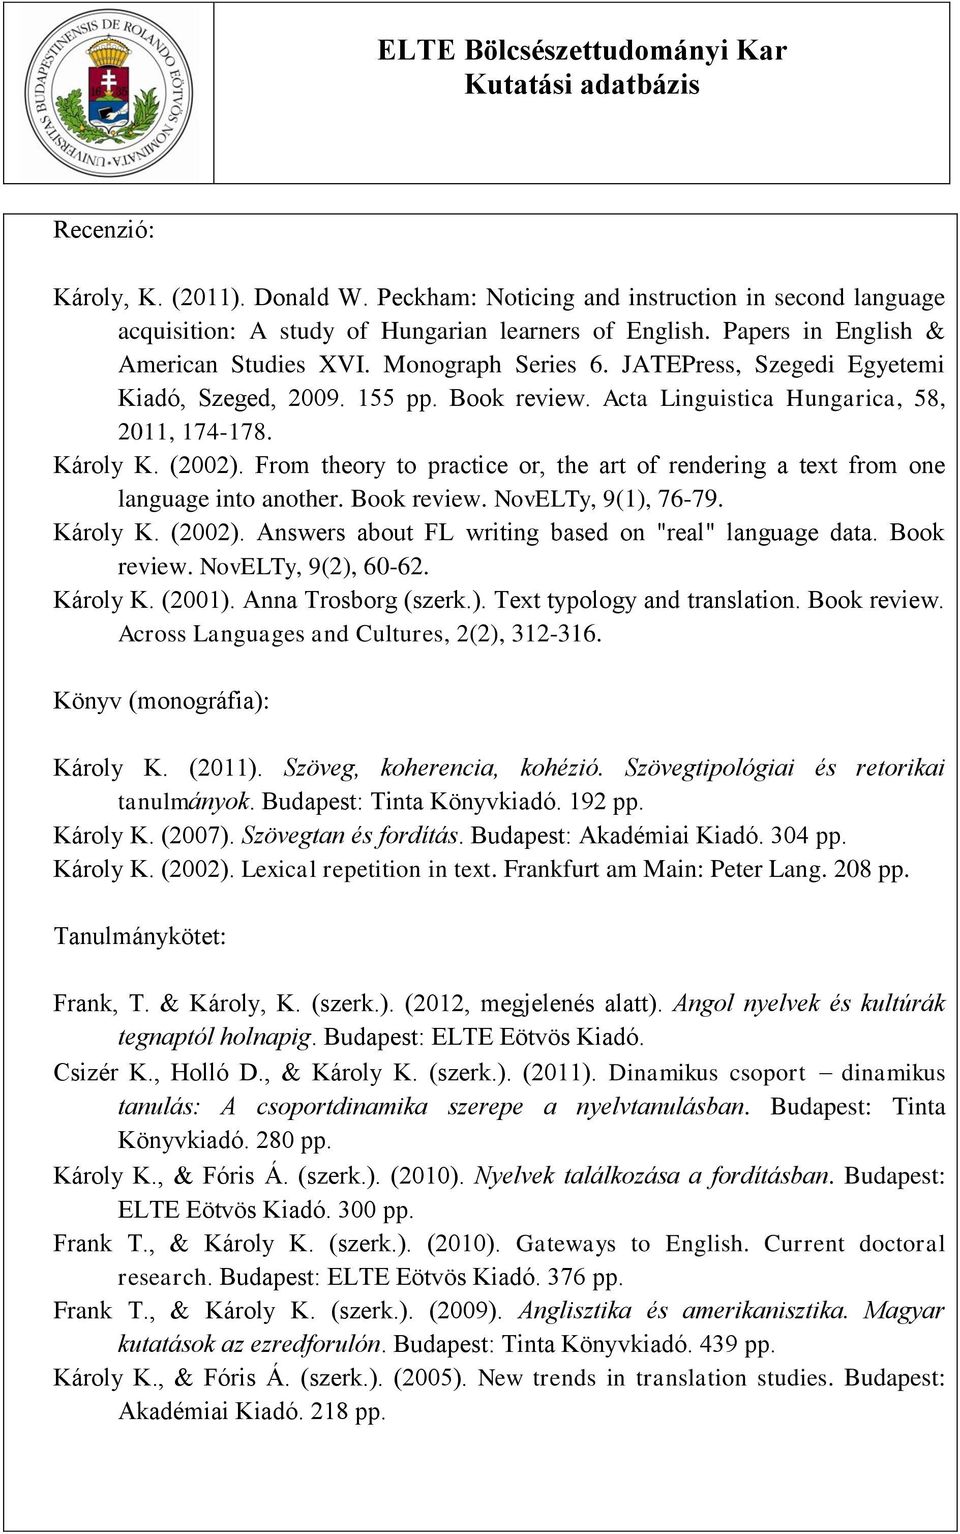 From theory to practice or, the art of rendering a text from one language into another. Book review. NovELTy, 9(1), 76-79. Károly K. (2002). Answers about FL writing based on "real" language data.